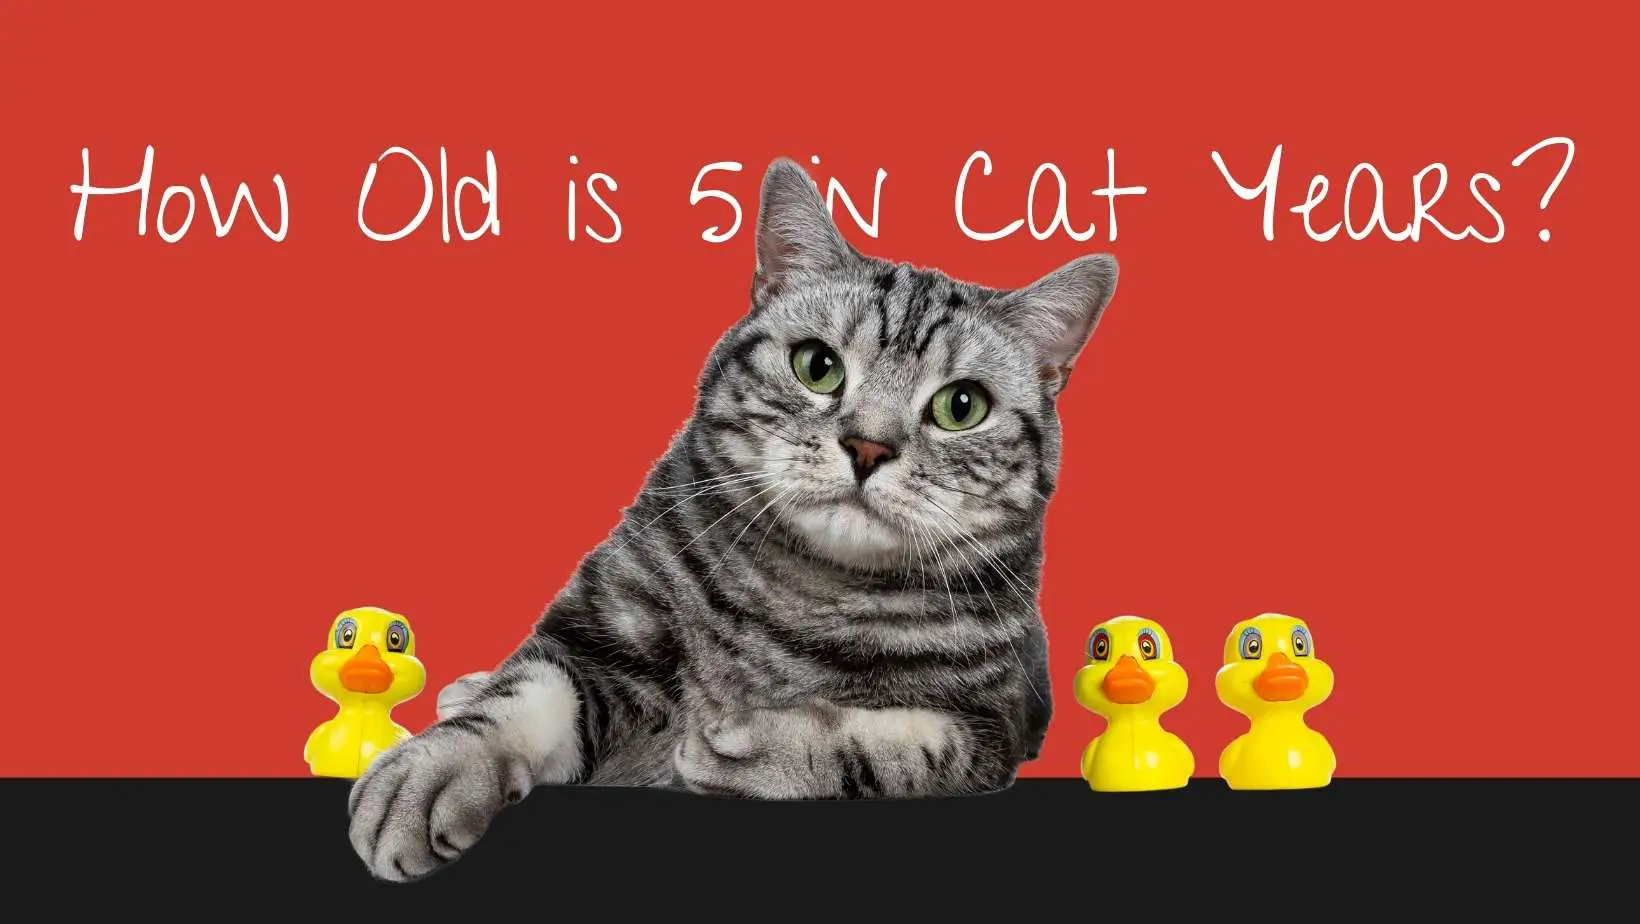 How Old is 5 in Cat Years?